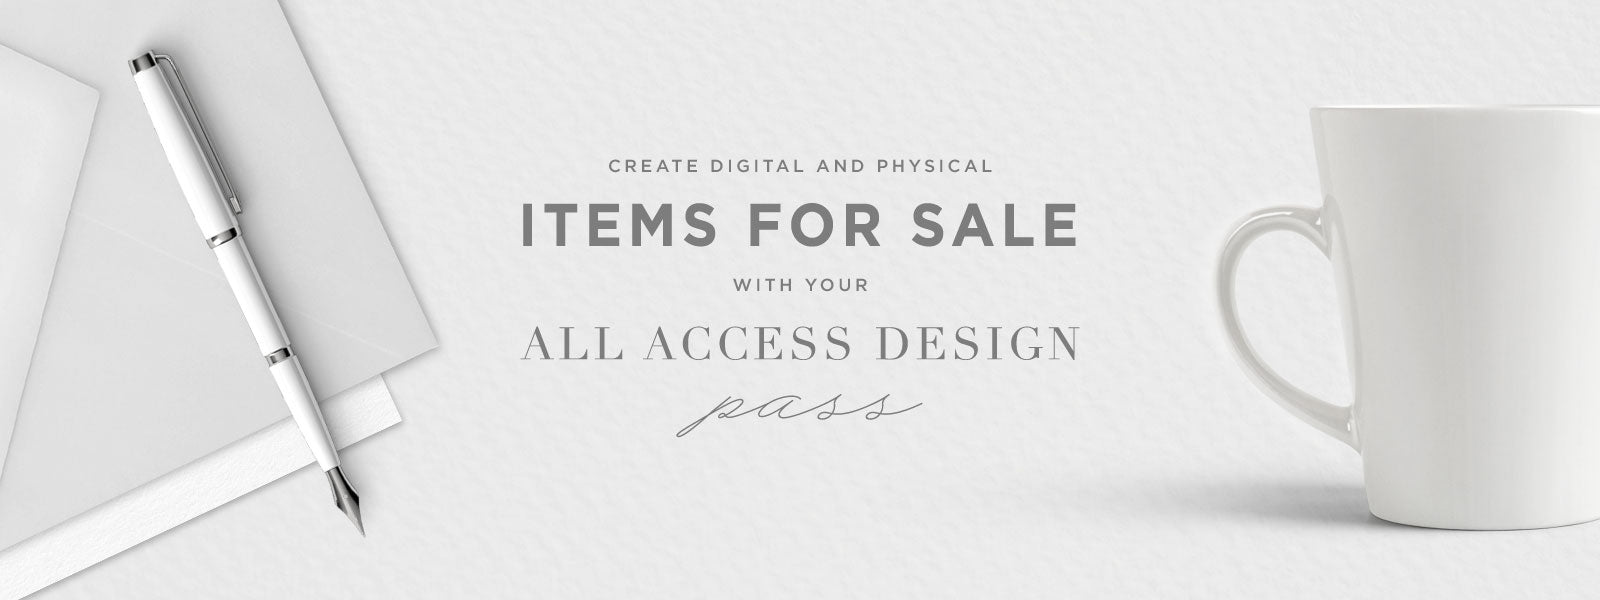 create items for sale using your all access design pass